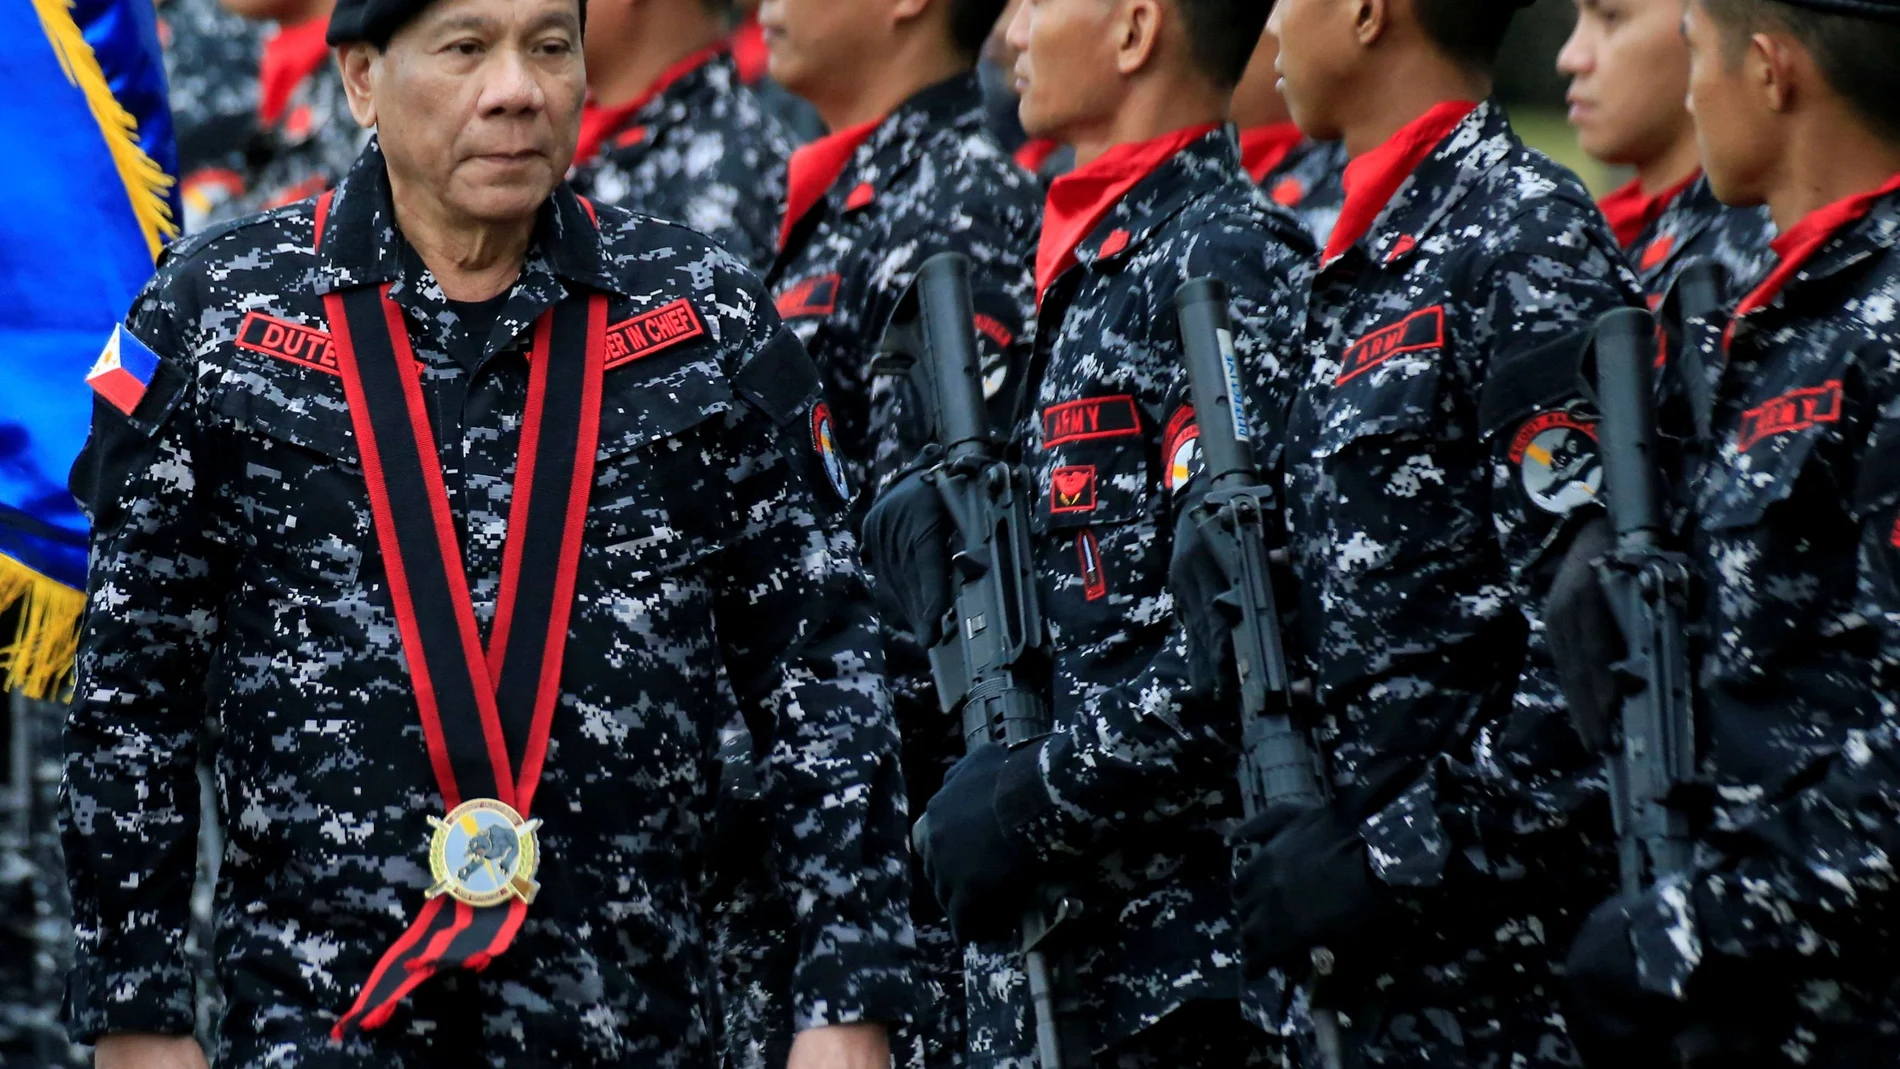 FILE PHOTO: Philippine President Rodrigo Duterte, wearing a military uniform, reviews scout ranger troops upon his arrival during the 67th founding anniversary of the First Scout Ranger regiment in San Miguel town, Bulacan province, north of Manila